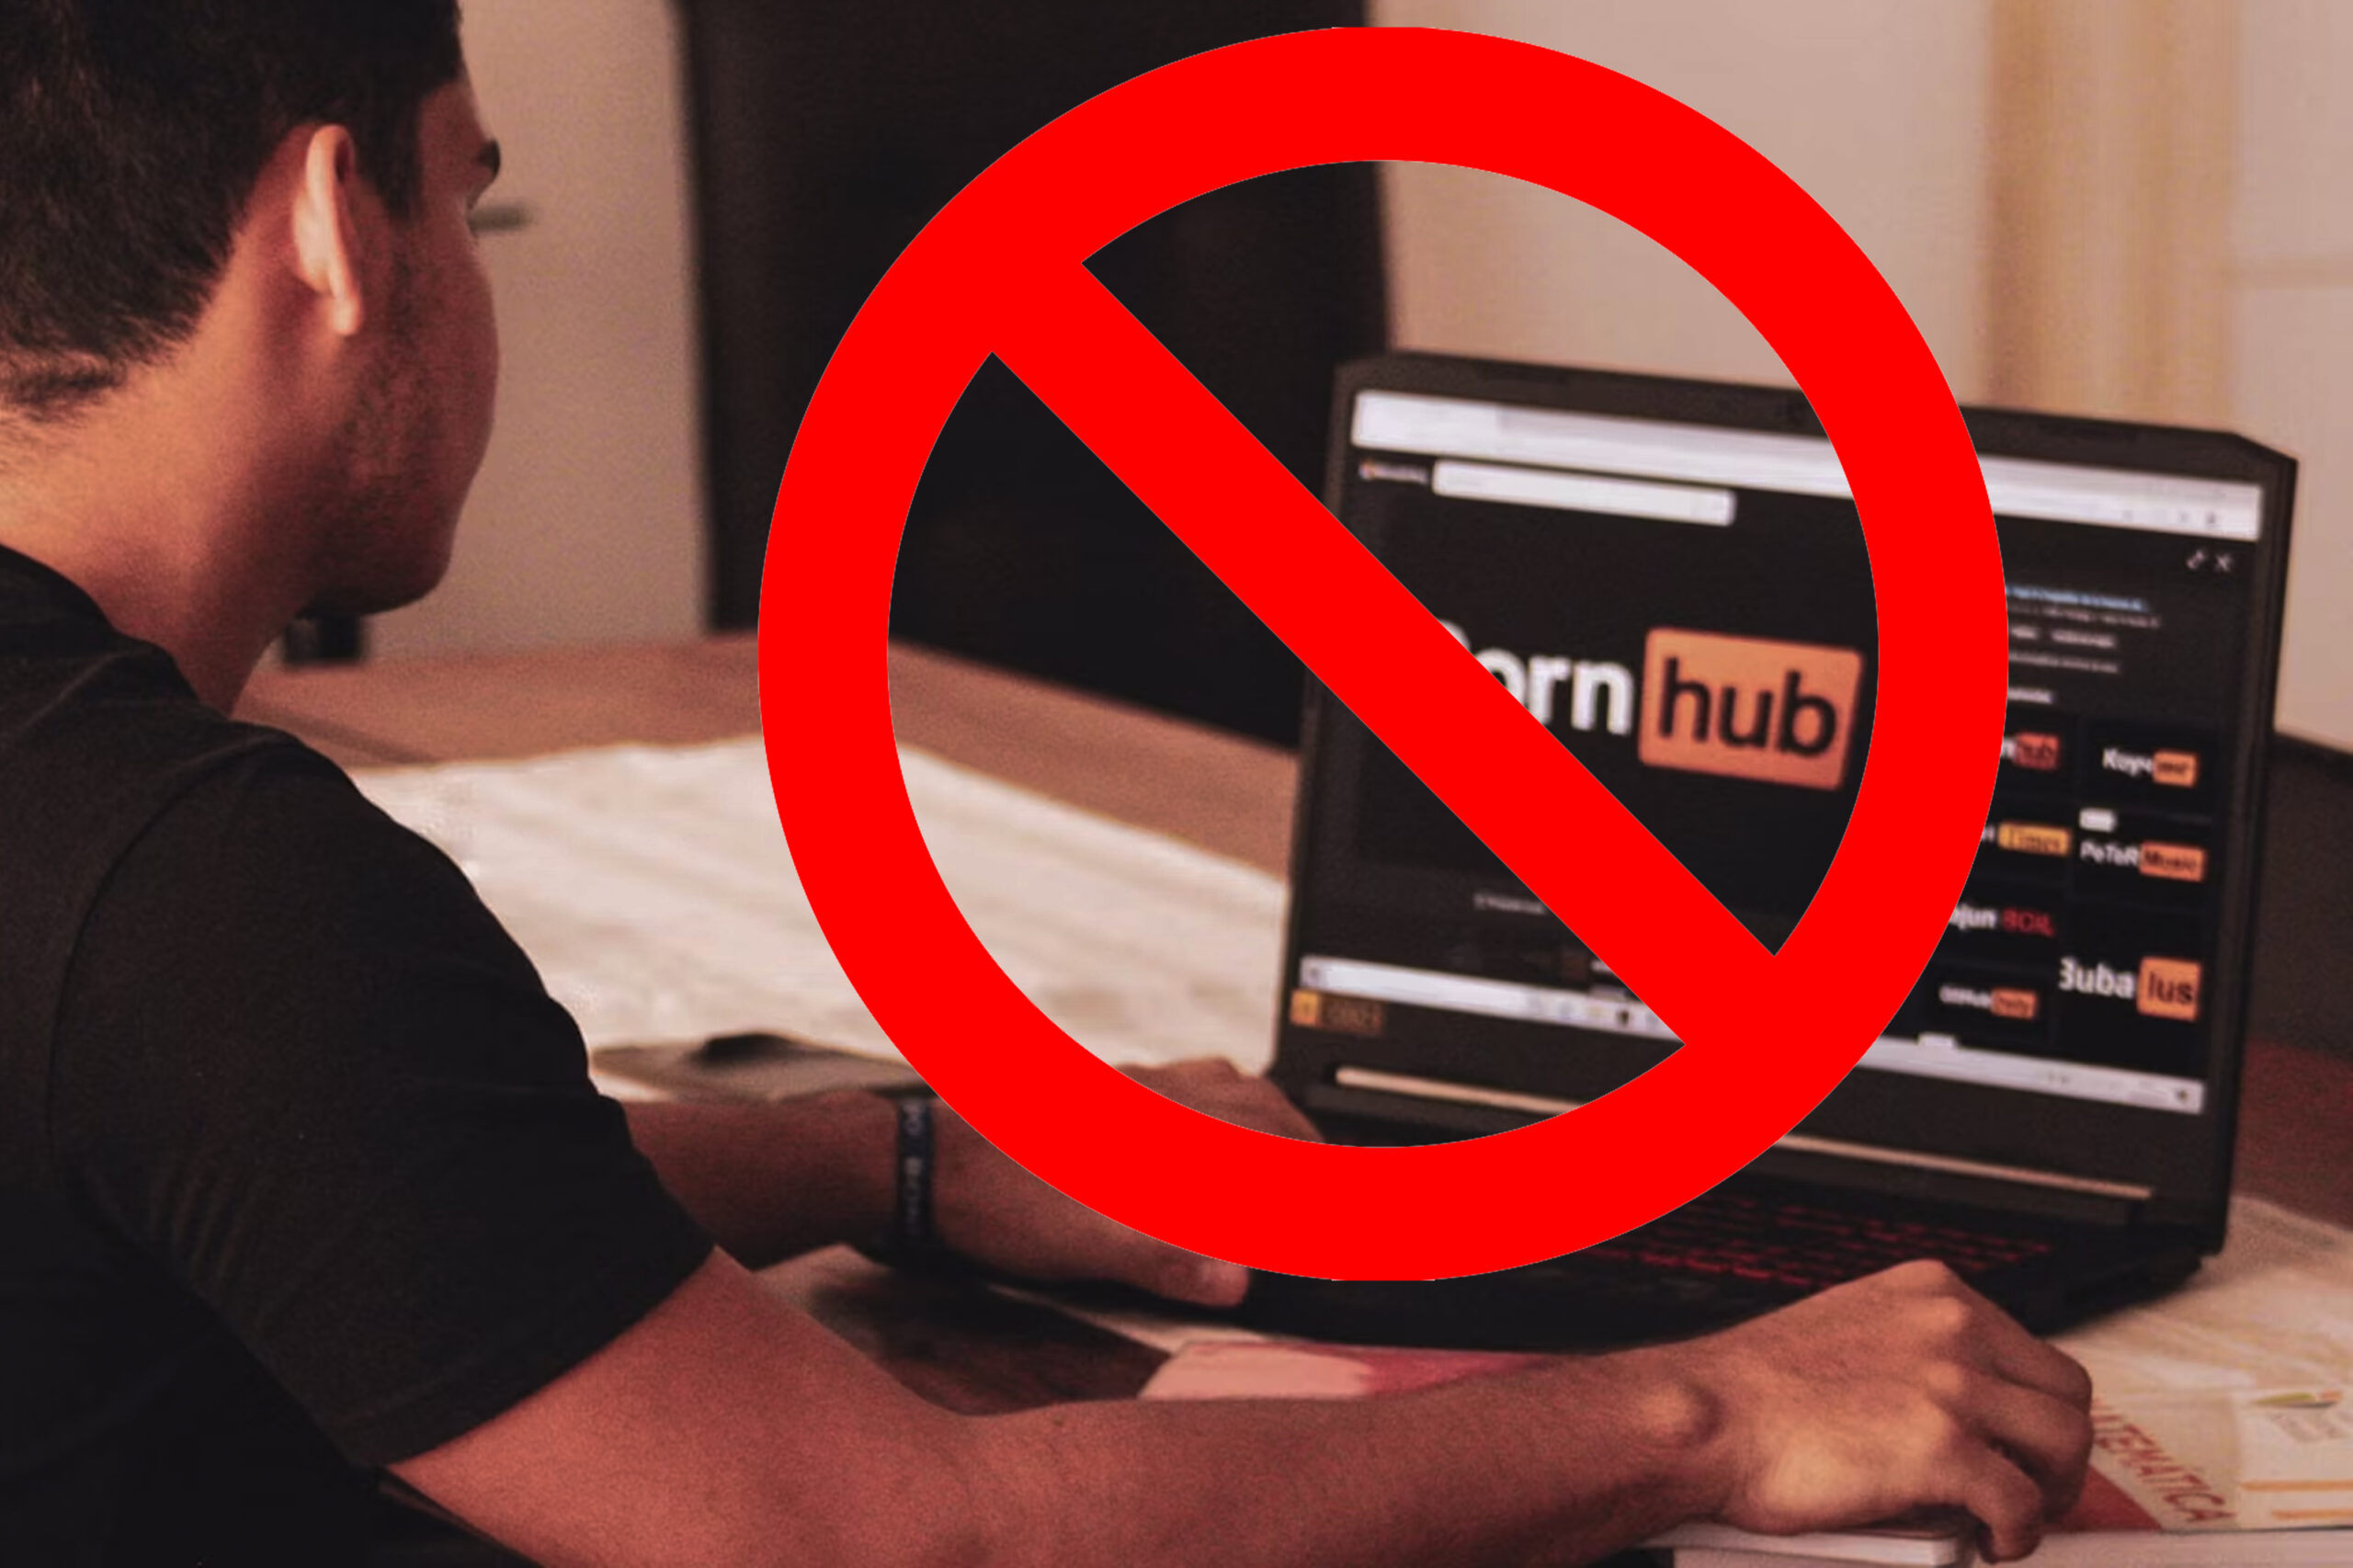 Ptonhub - Pornhub Blocks Access In Utah Because of State's New Age Verification Law -  RELEVANT